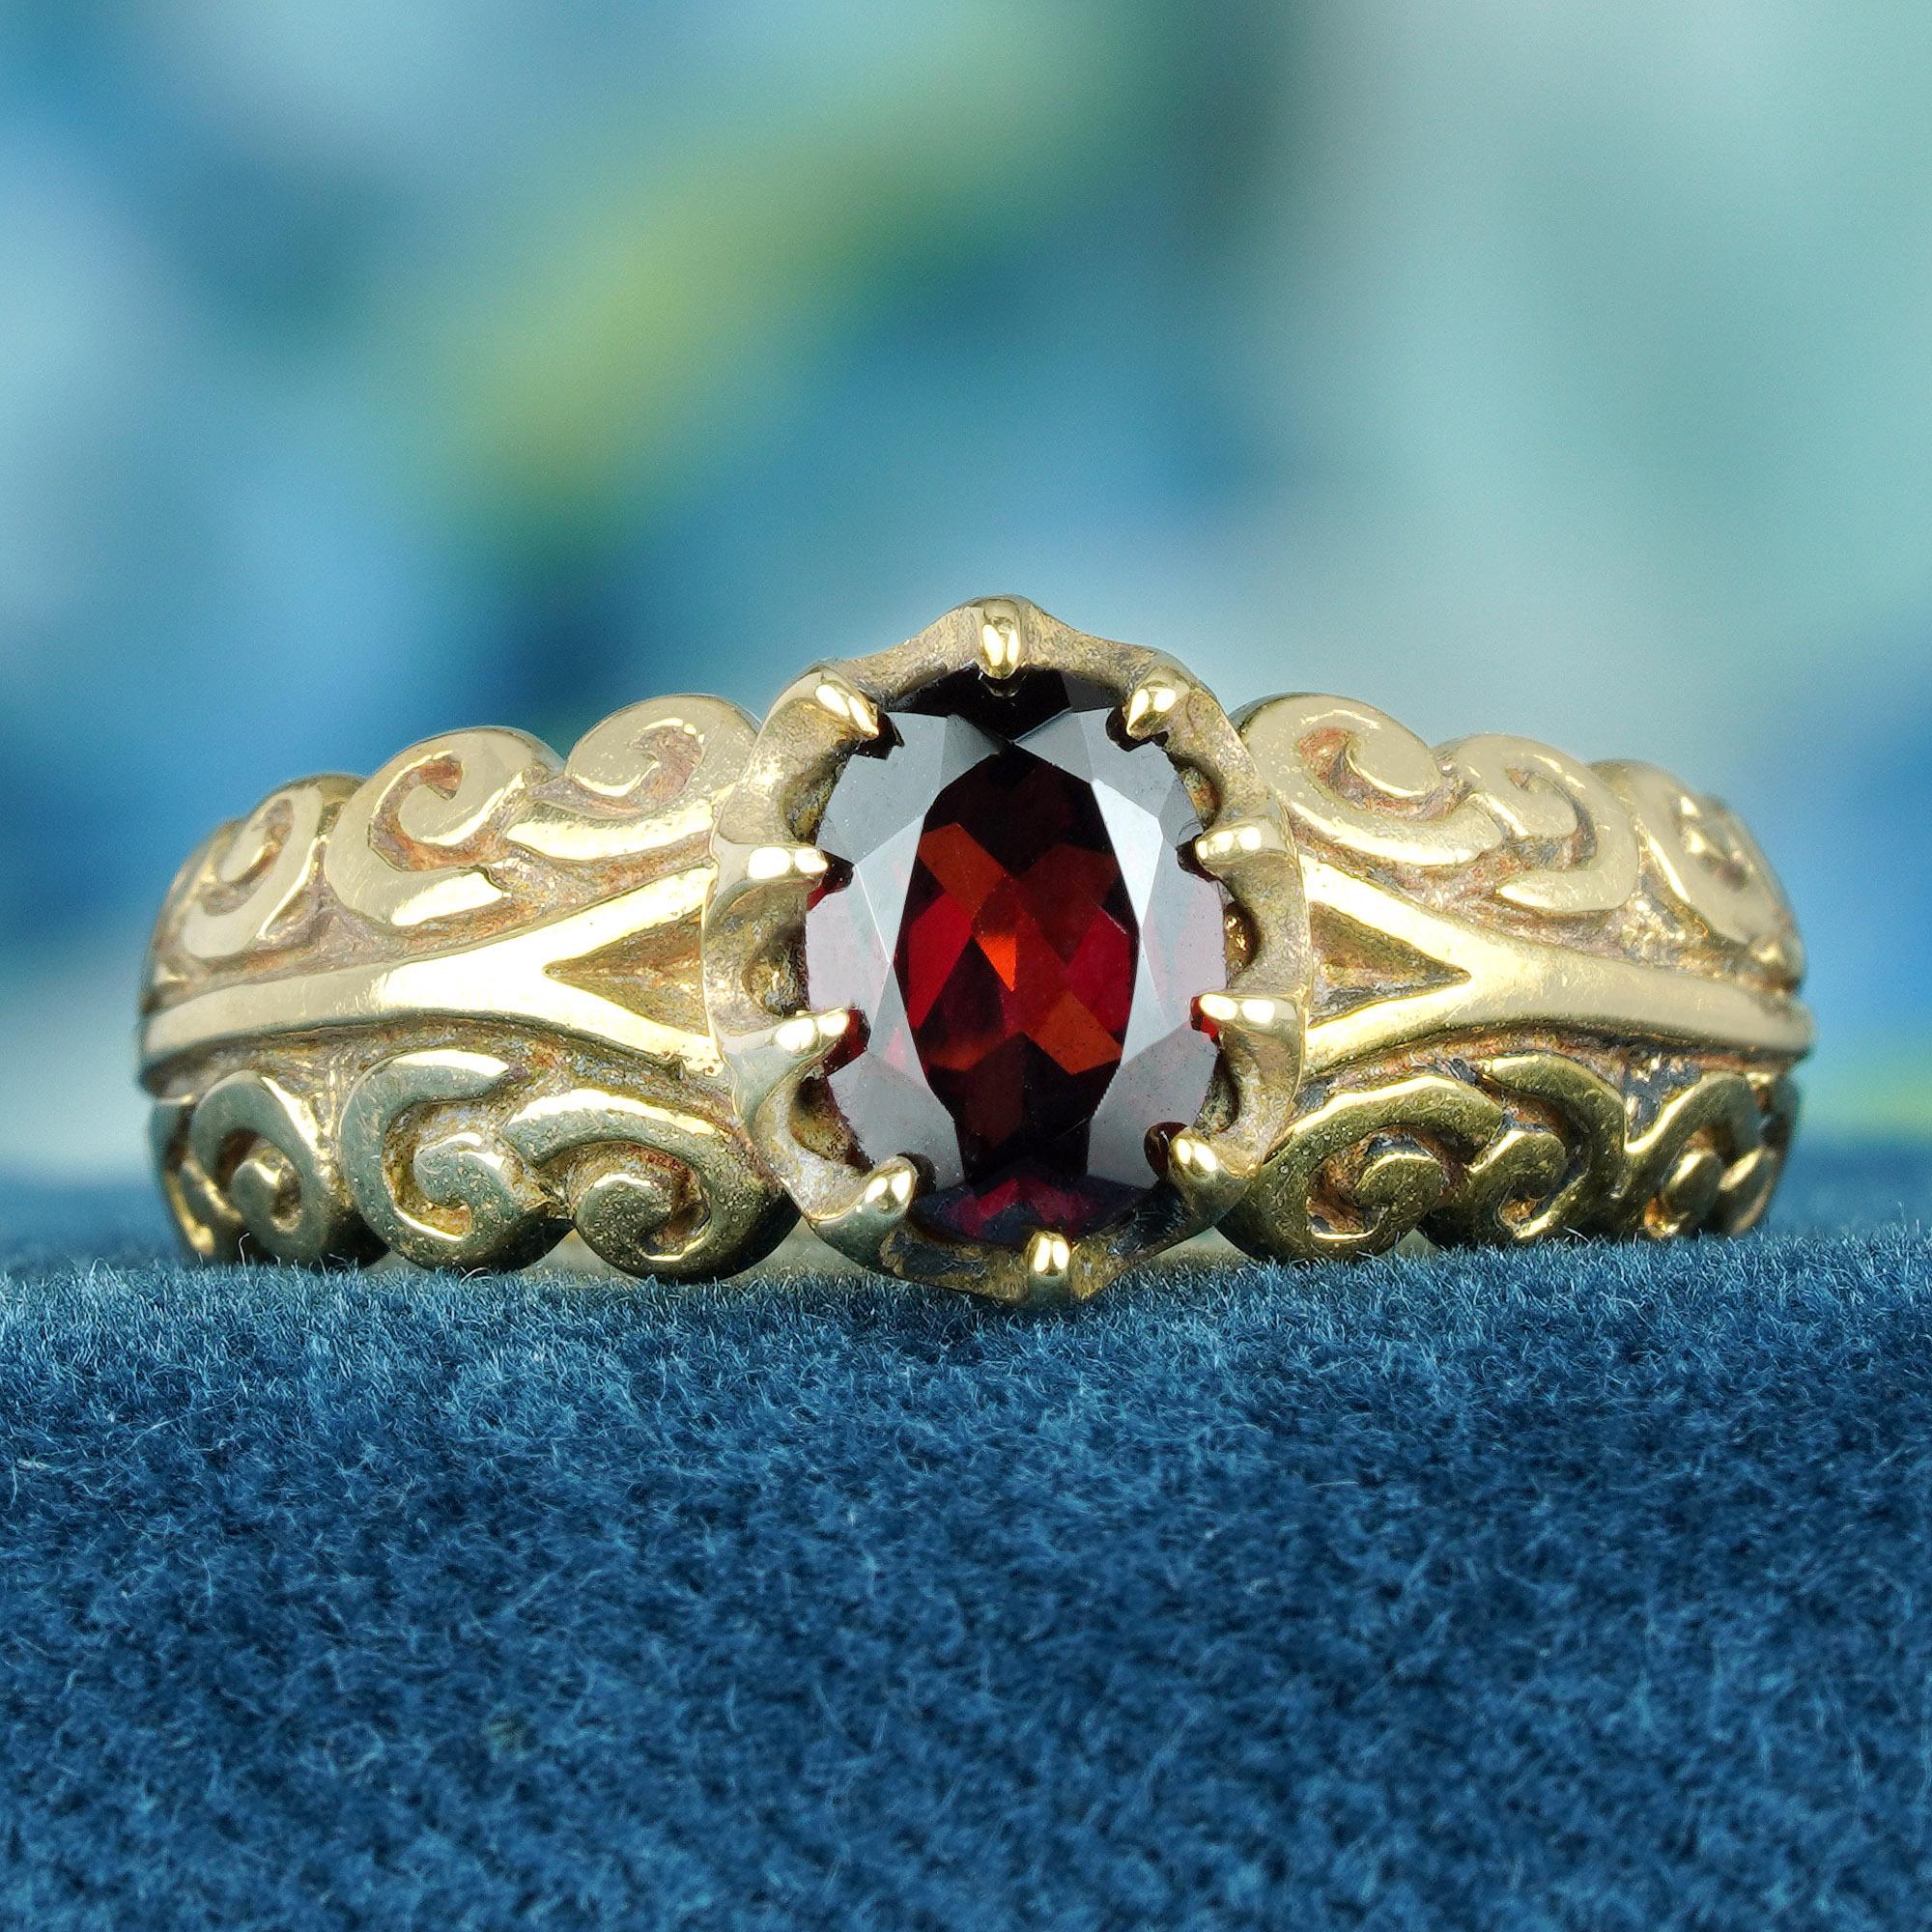 Adorned with a fiery oval red garnet gemstone and set in intricate gold, this ring stands as a masterpiece of craftsmanship. The delicate swirling carved band speaks volumes about artistry and meticulous attention to detail. So, go ahead, indulge in